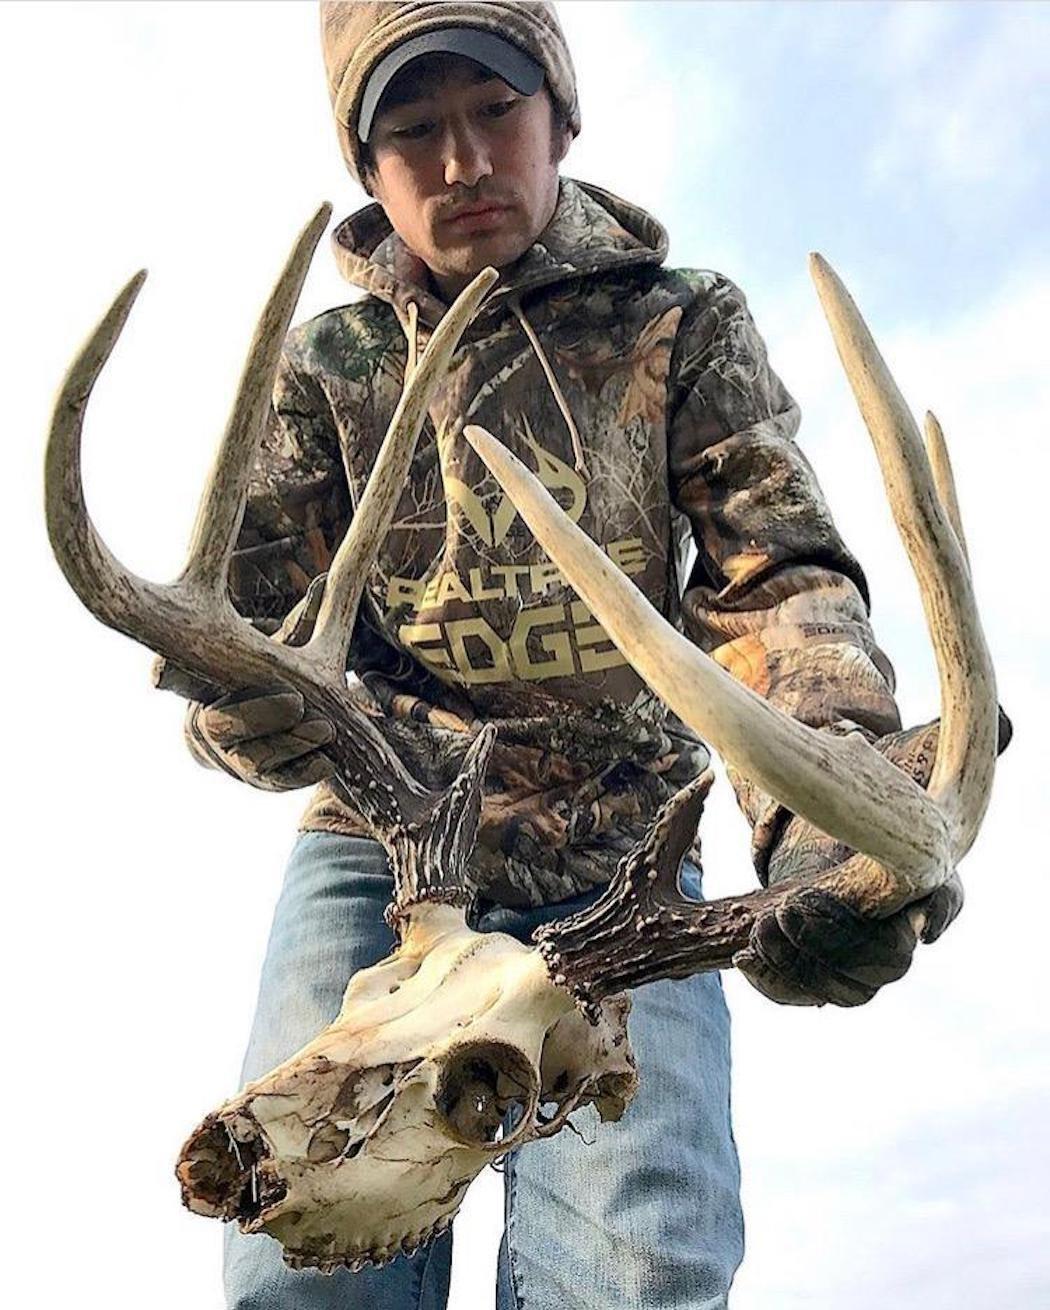 Myth: You Can Always Automatically Pick Up a Dead Head When Shed Hunting